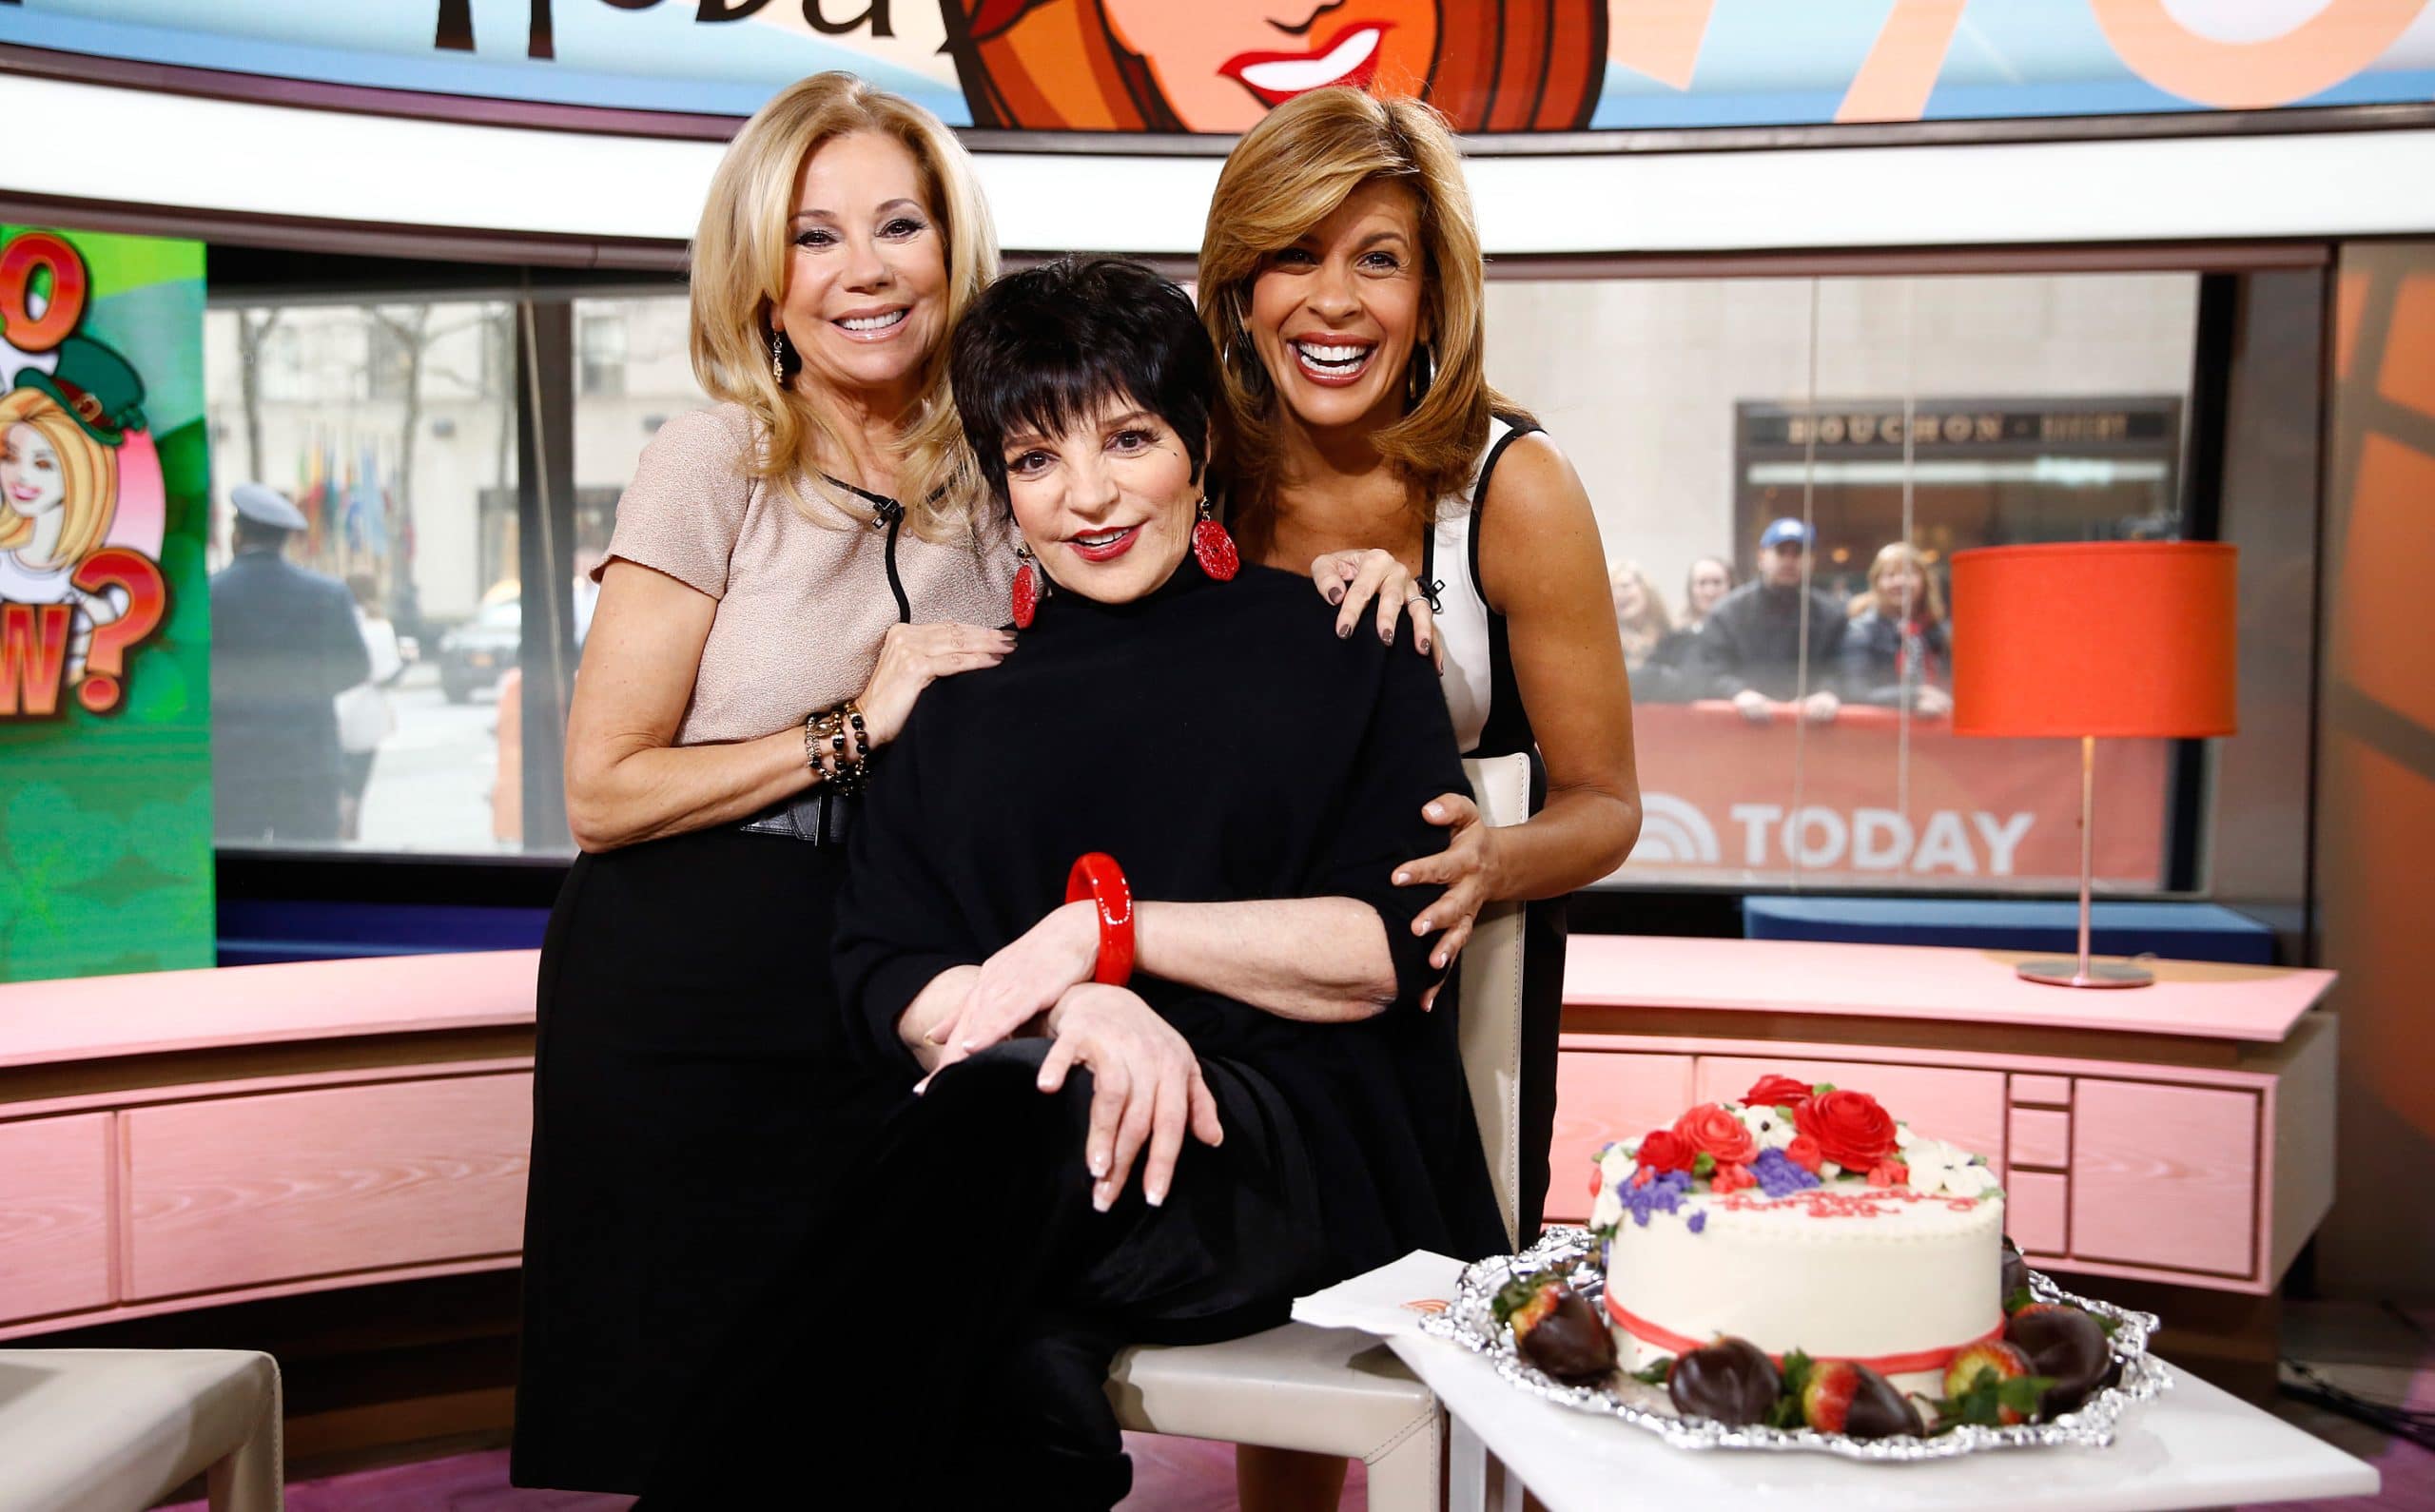 THE TODAY SHOW (aka TODAY), from left: Kathie Lee Gifford, Liza Minnelli, Hoda Kotb, (aired March 12, 2014)